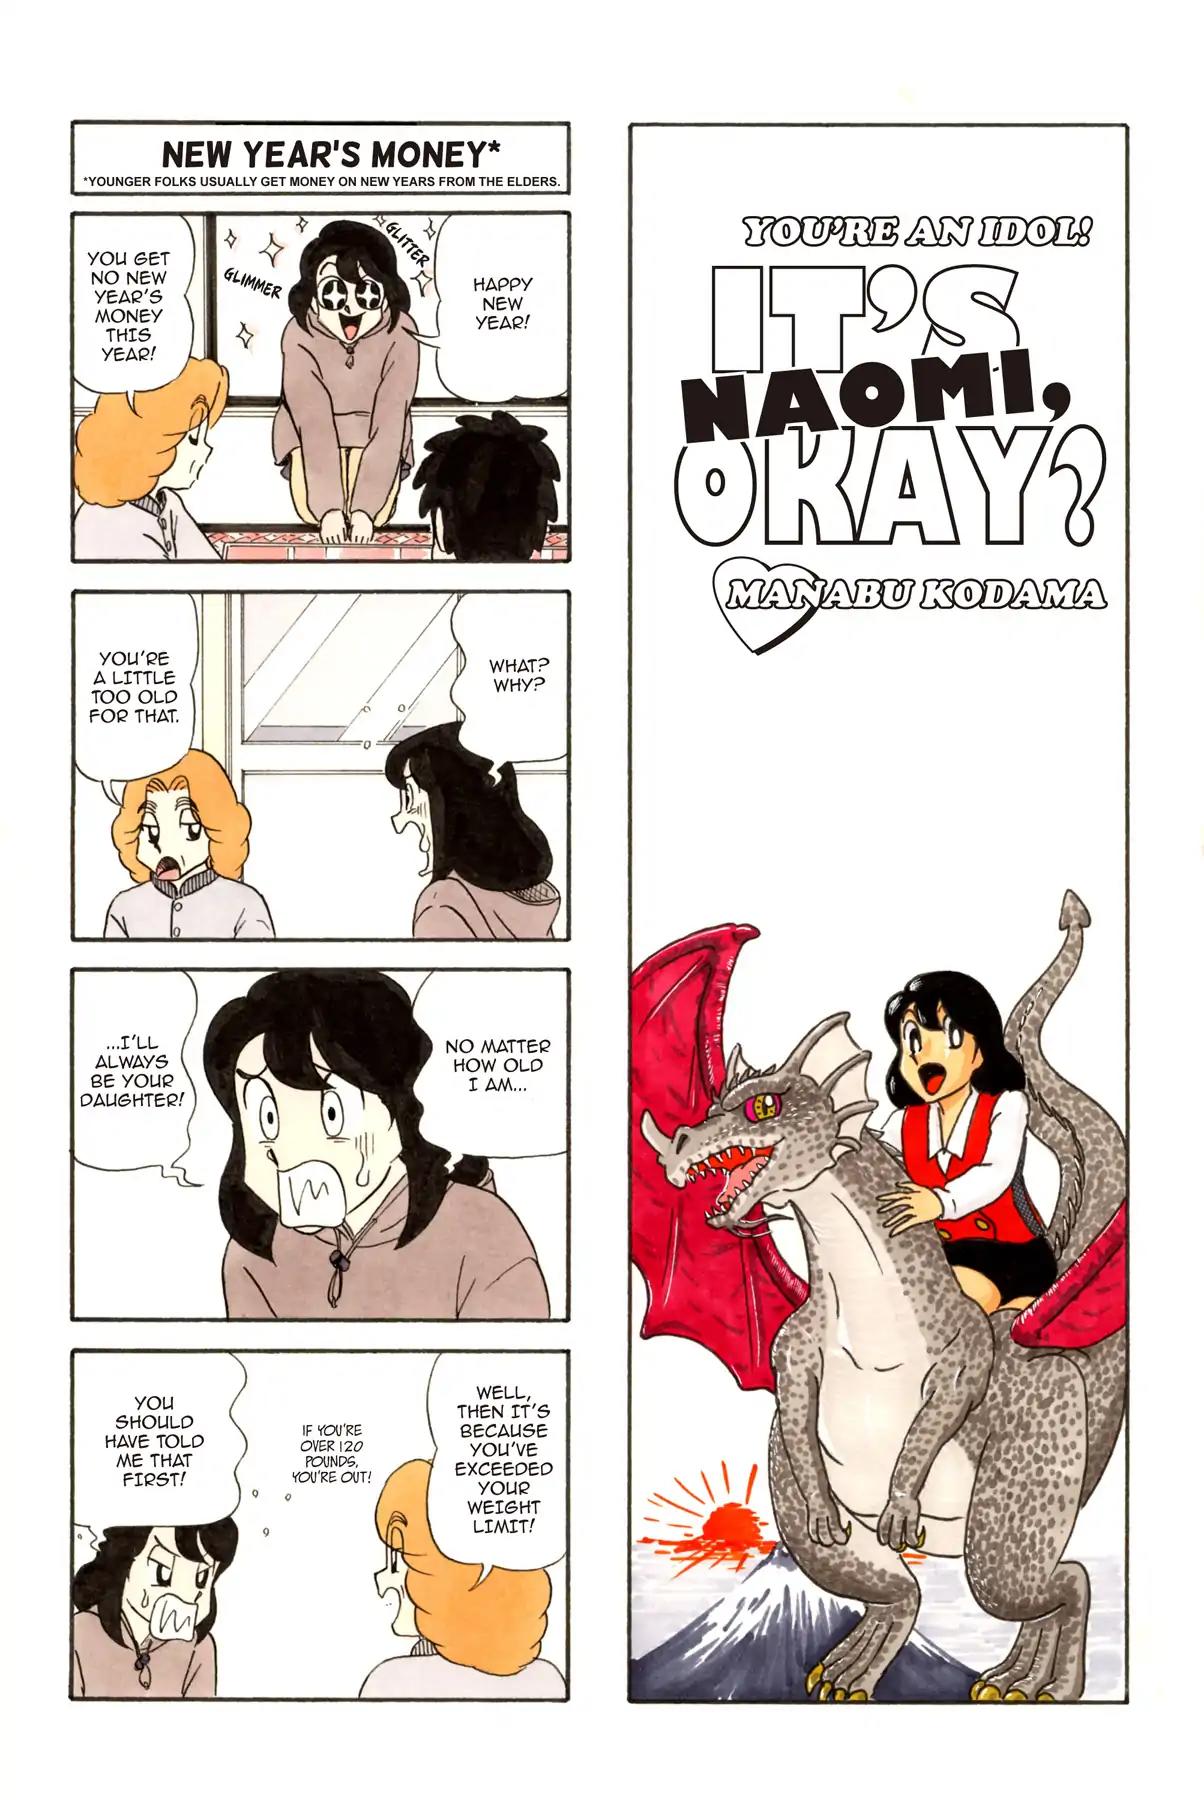 It's Naomi, Okay? After 16 Vol 1 Chapter 25